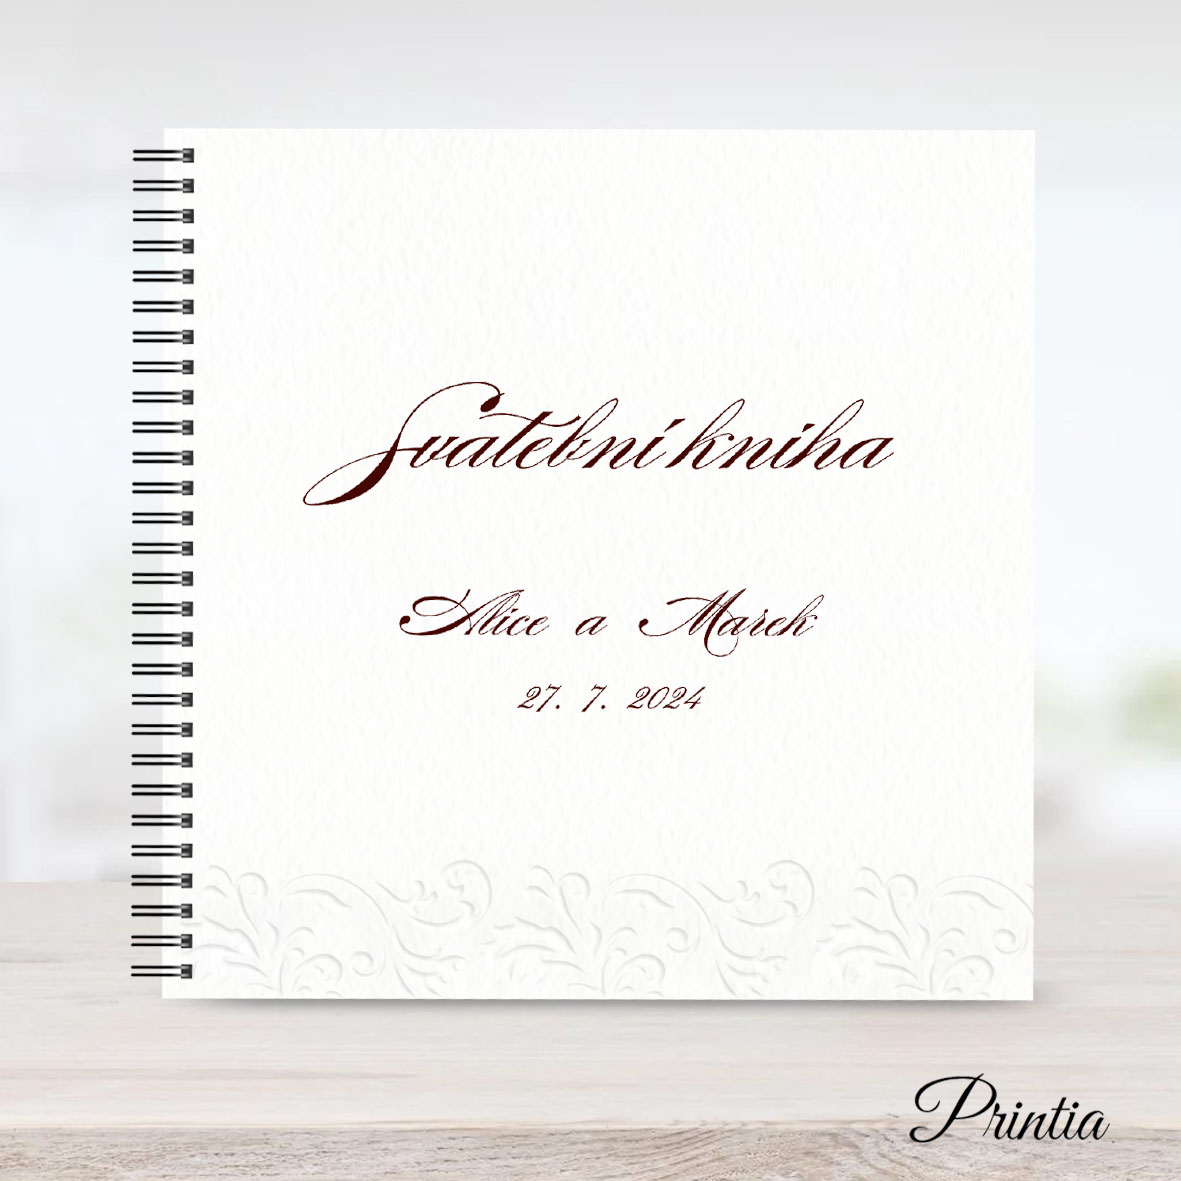 Wedding book with relief ornament